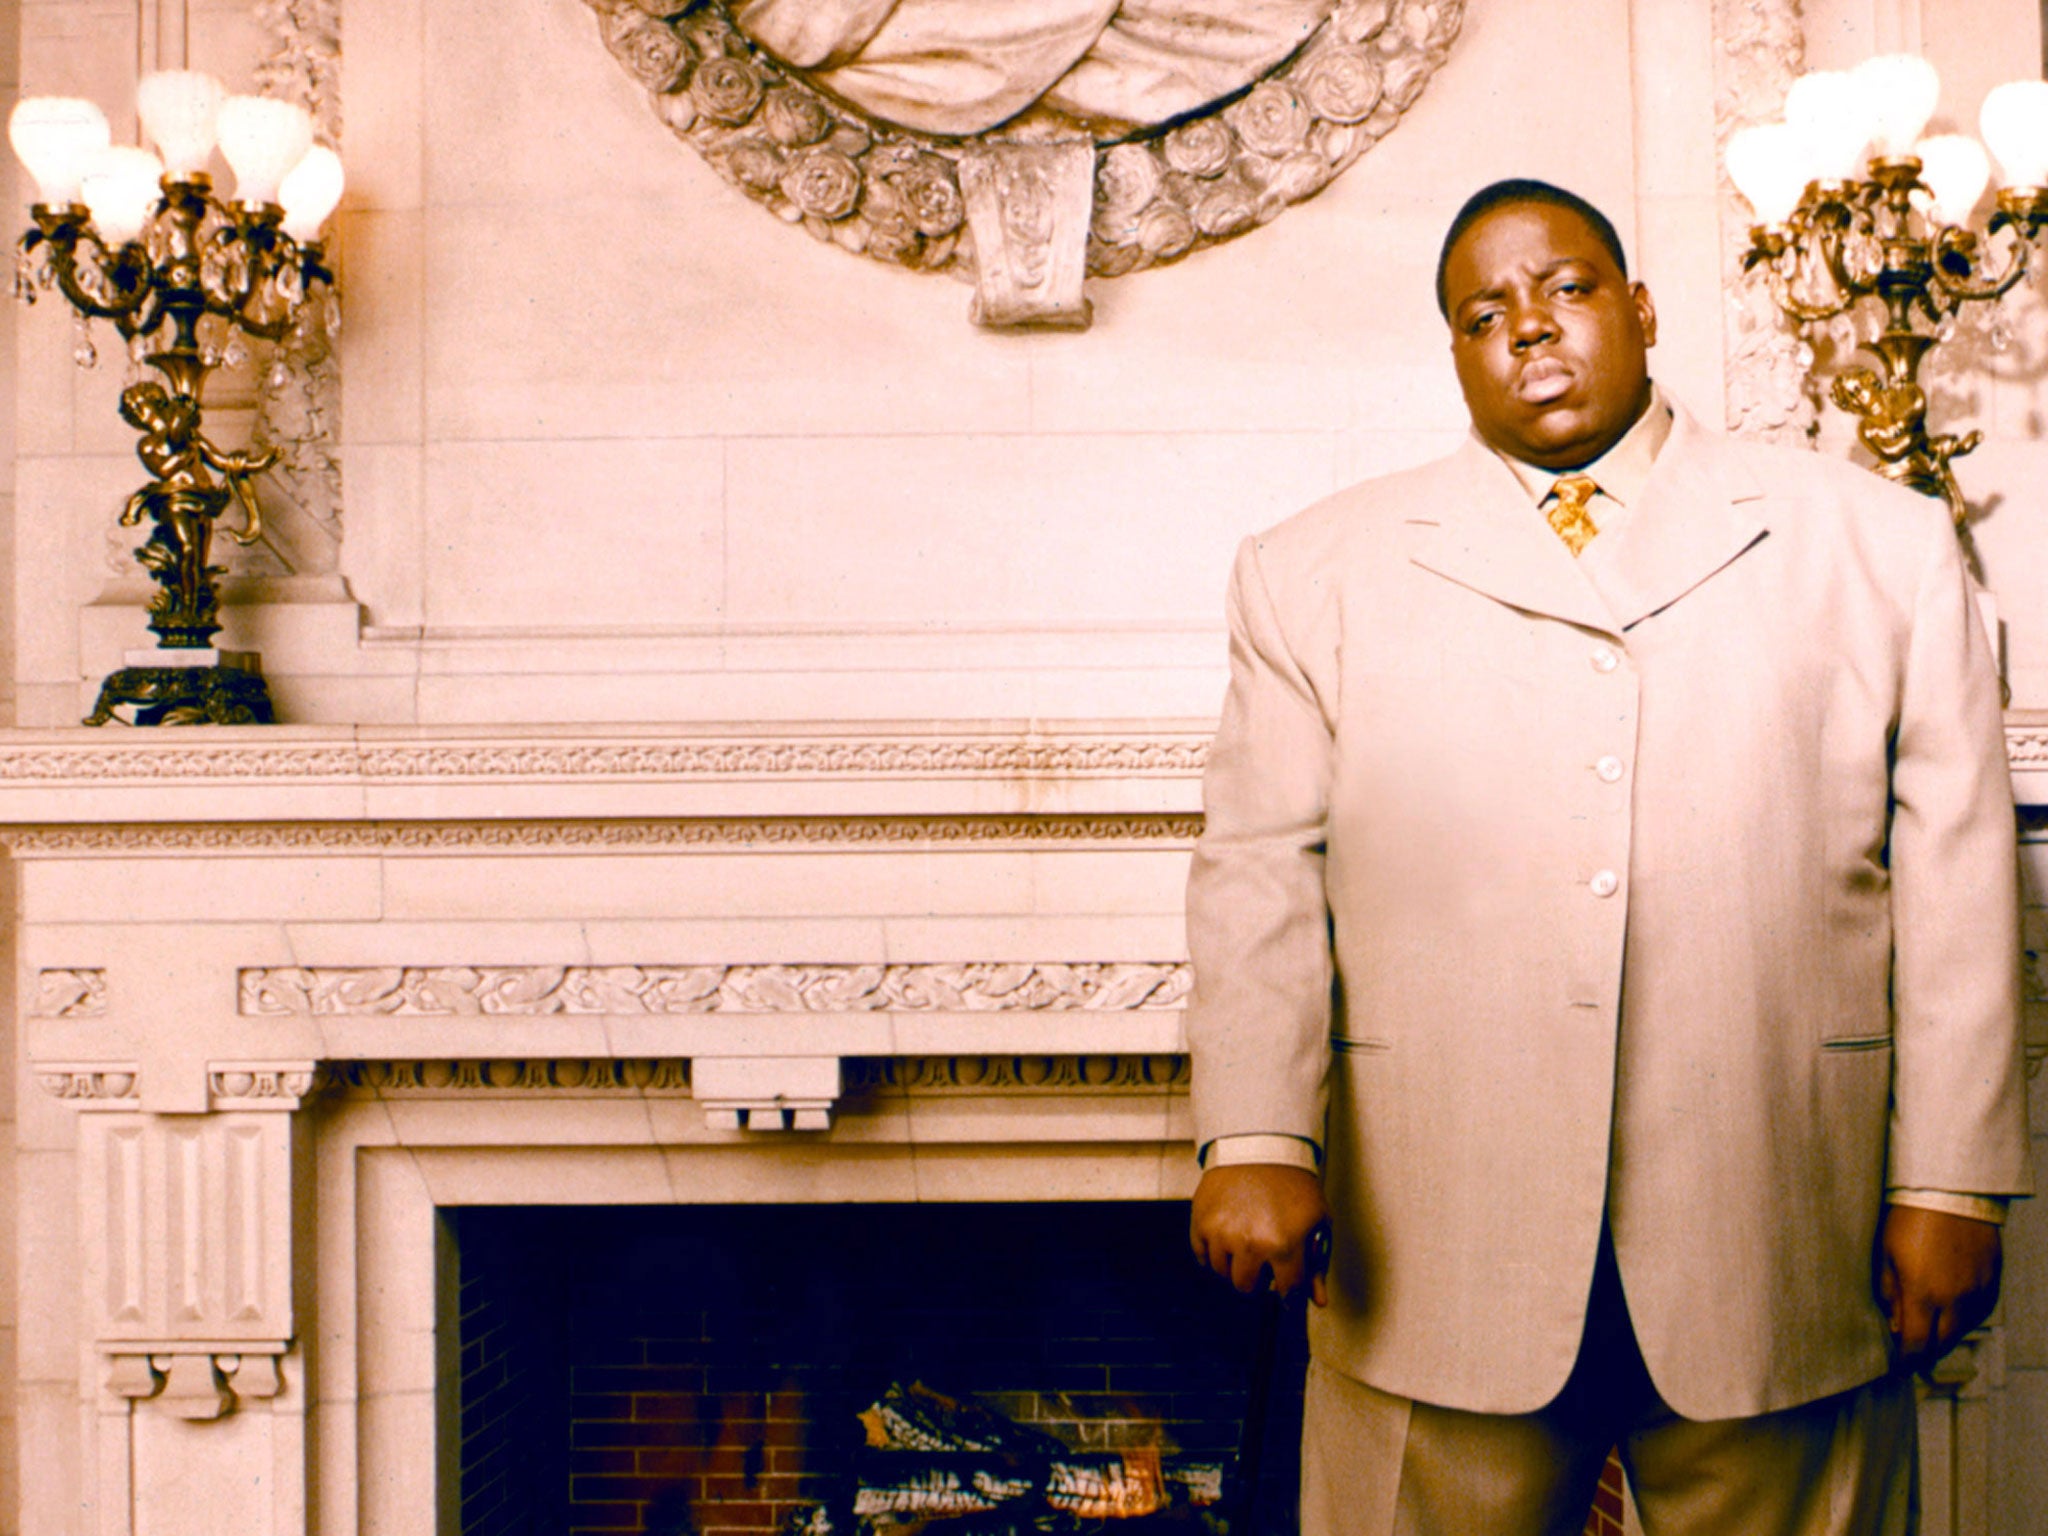 Christopher Wallace, shot to death in his car in 1997, was better known as Notorious BIG, or Biggie Smalls